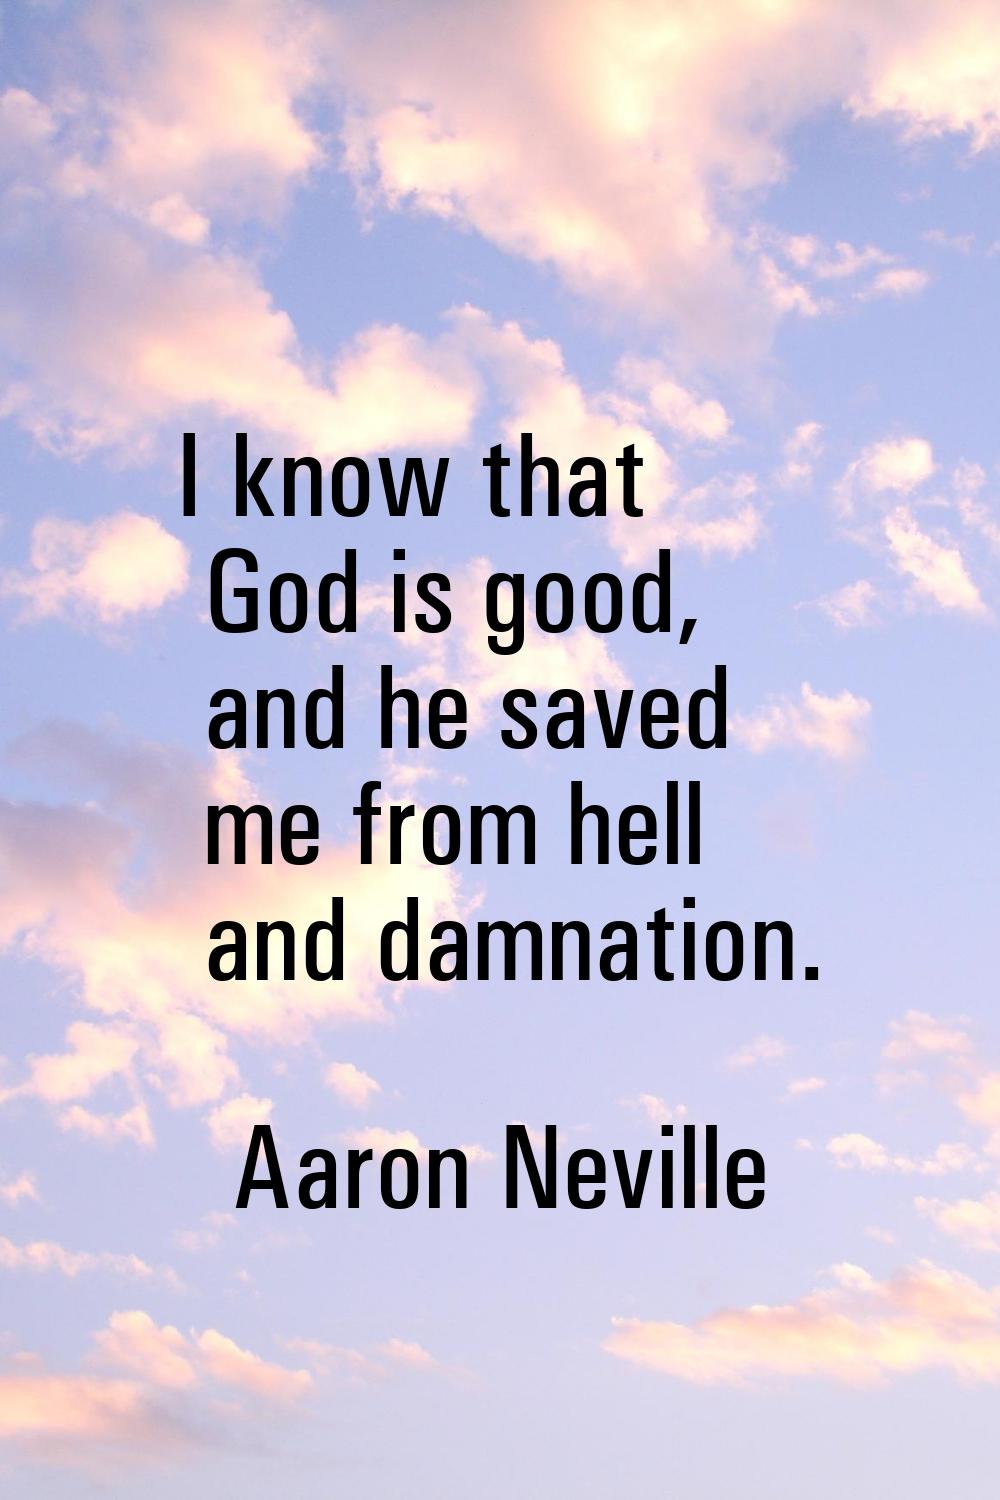 I know that God is good, and he saved me from hell and damnation.